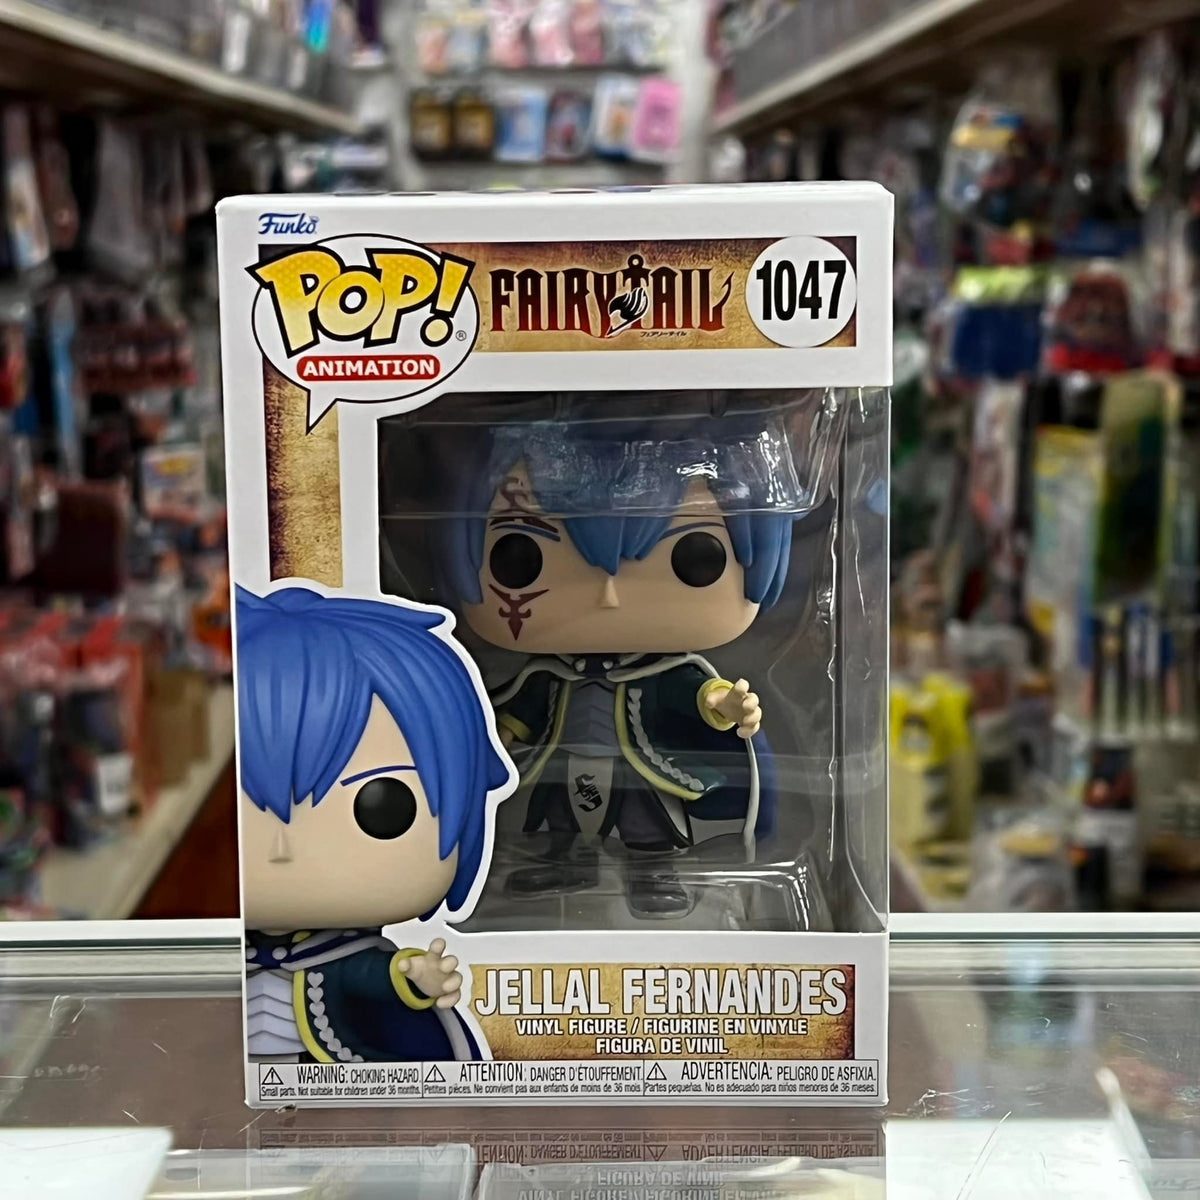 Fairy Tail Jellal Fernandes Funko Pop! Collectible Anime Figure